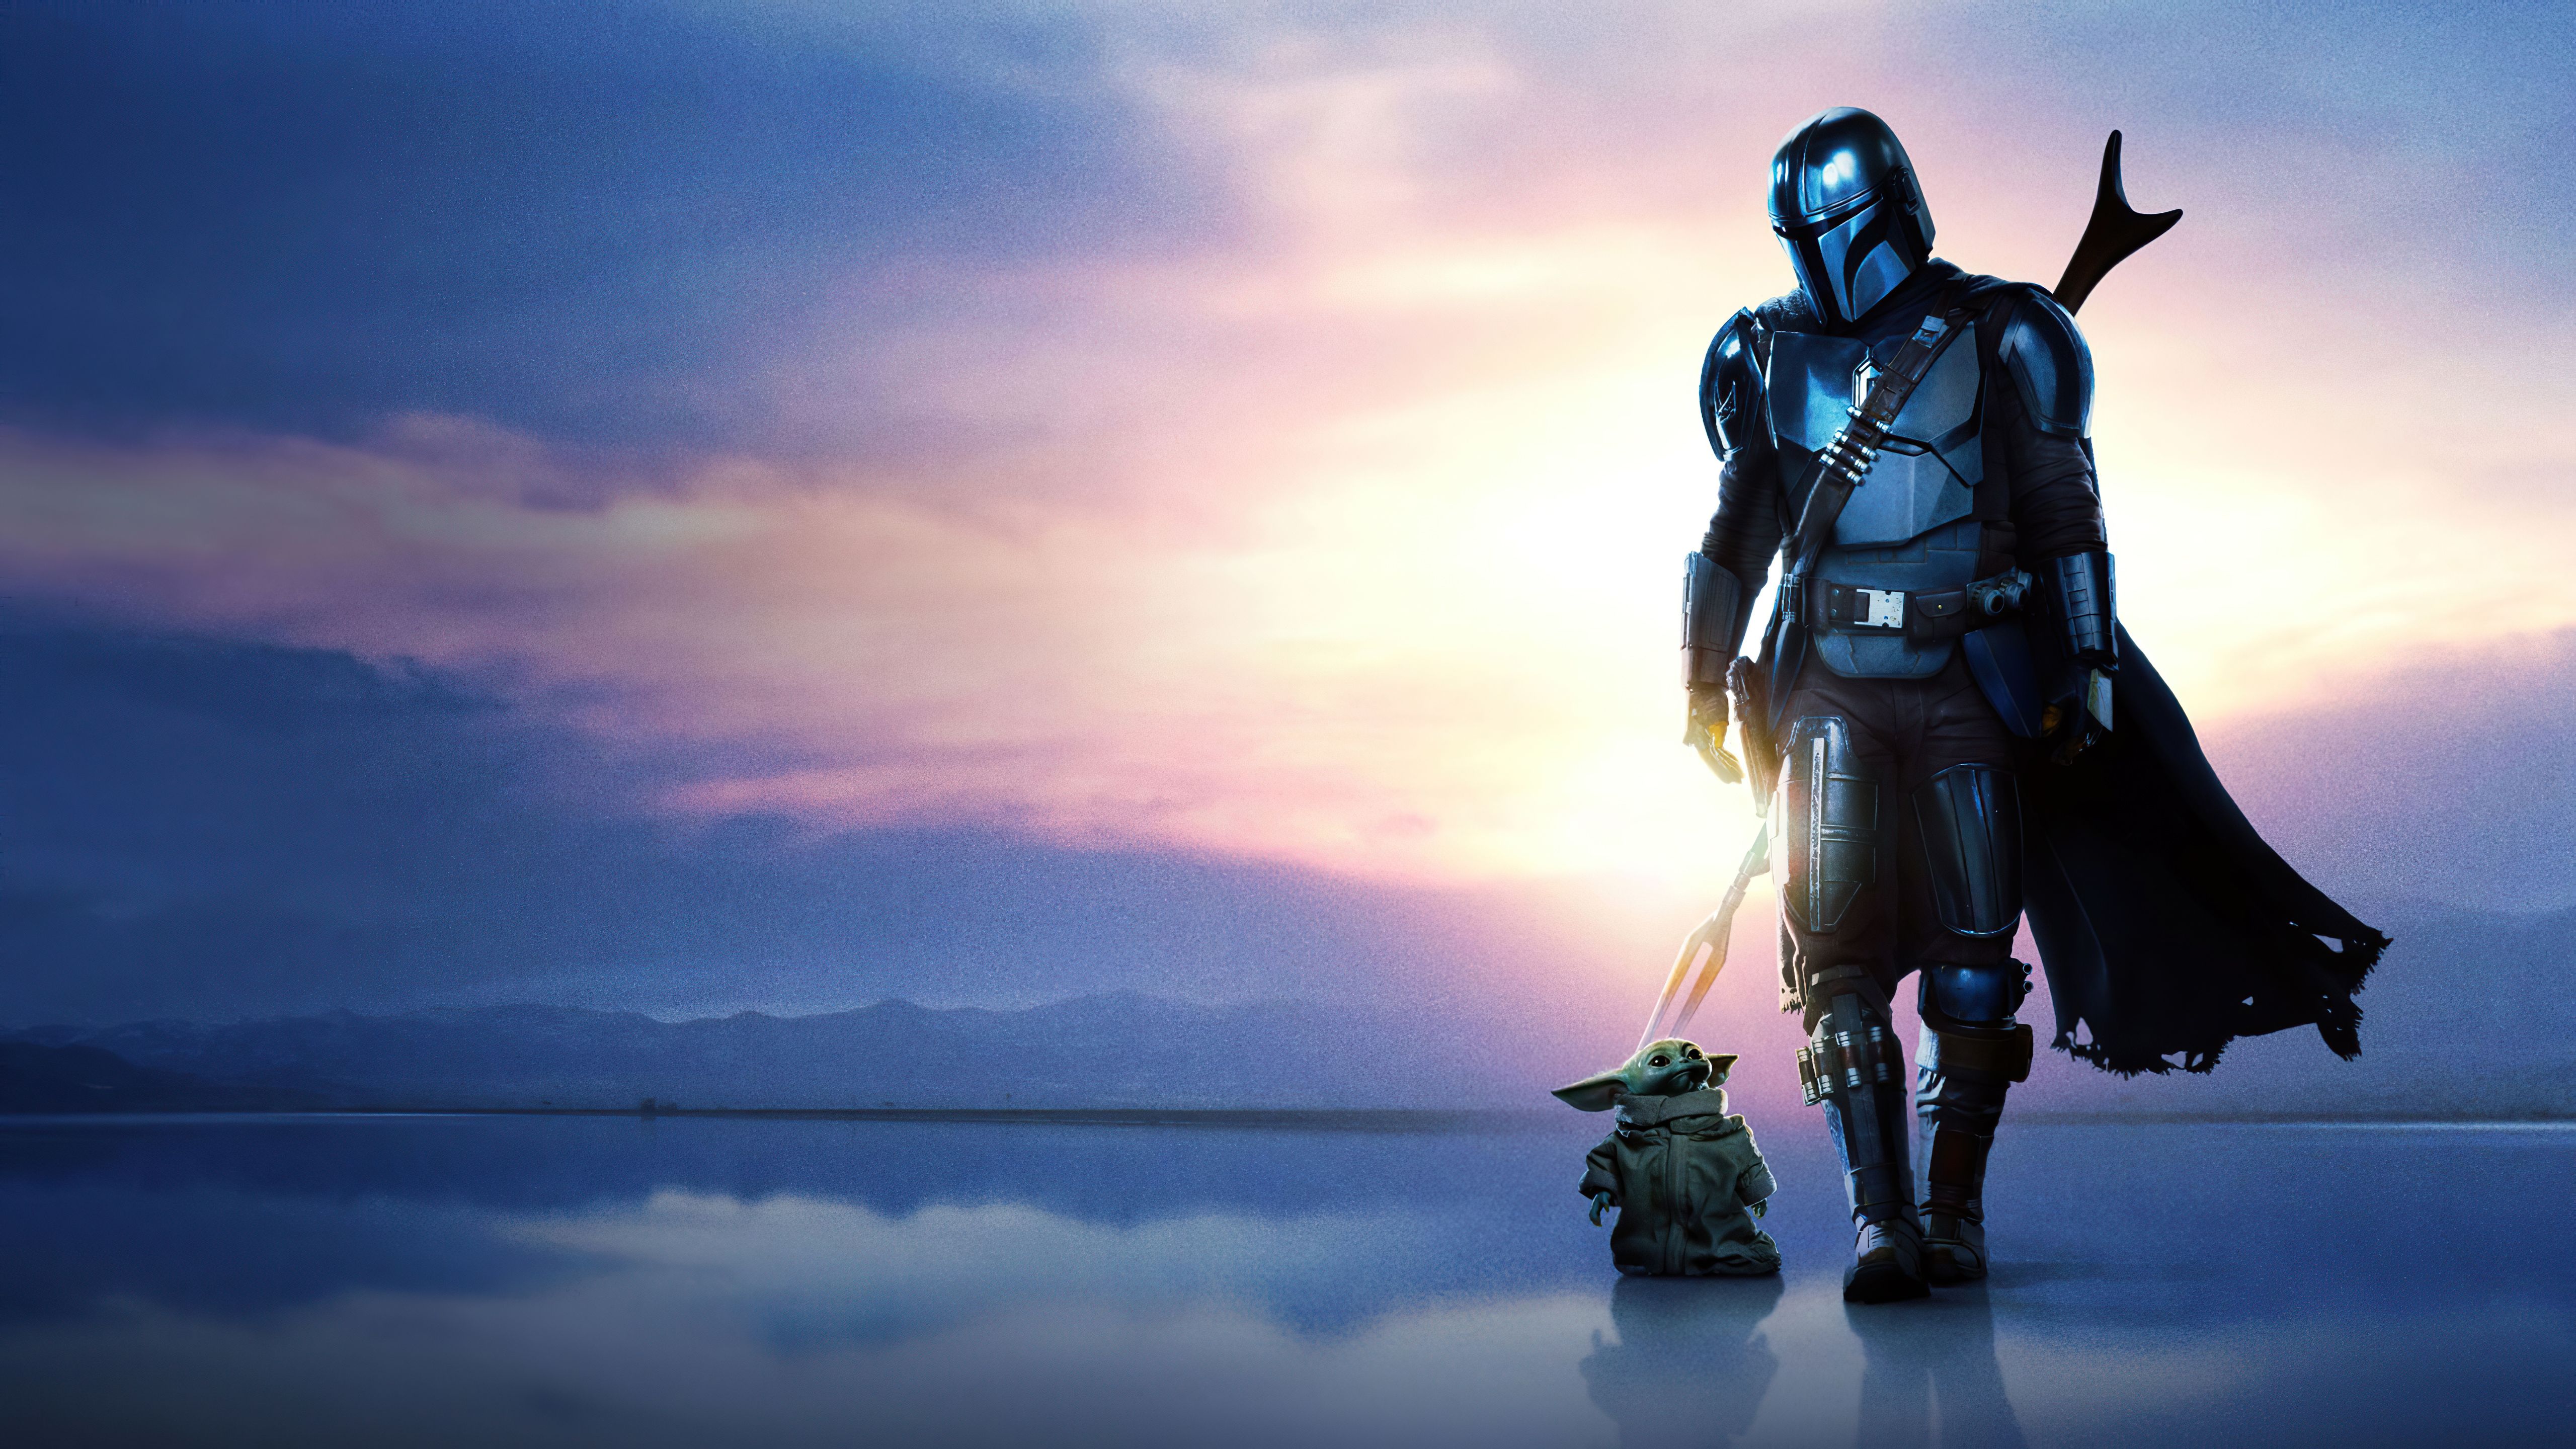 The Mandalorian Season 2 Tv Series, HD Tv Shows, 4k Wallpaper, Image, Background, Photo and Picture